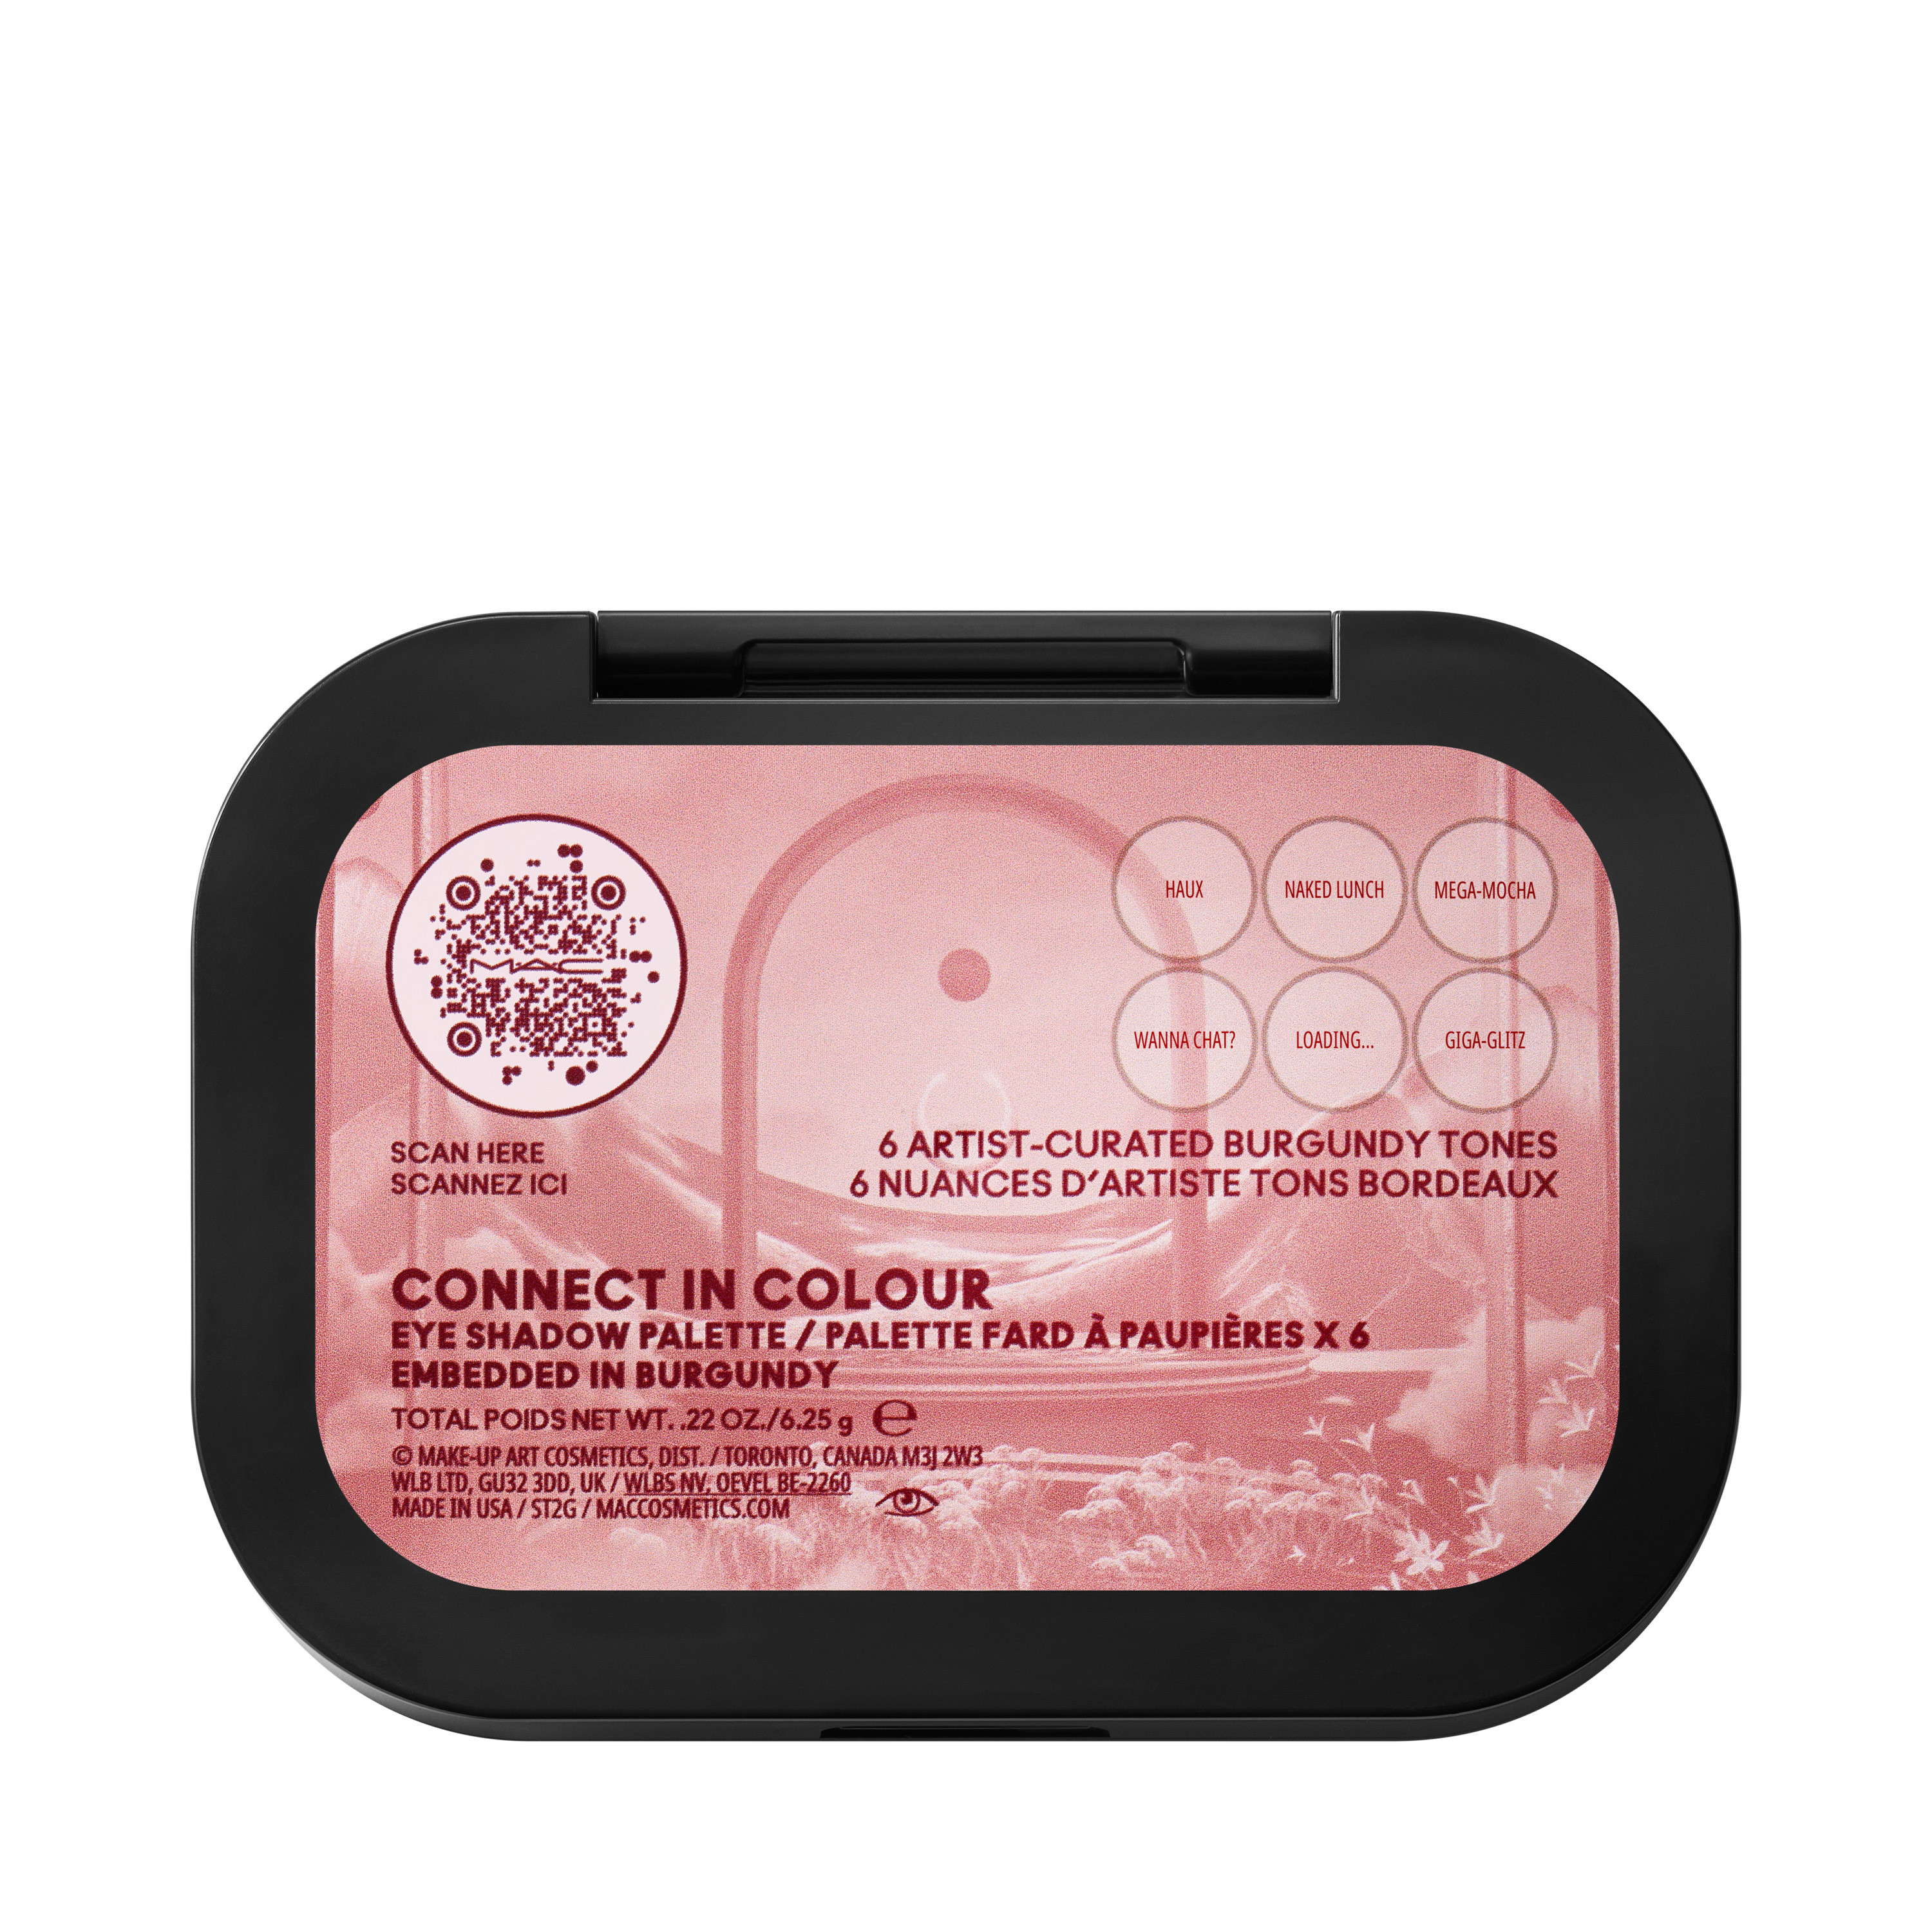 Connect in colour eye palette x6 - Embedded In Burgundy, Dark Pink, large image number 2